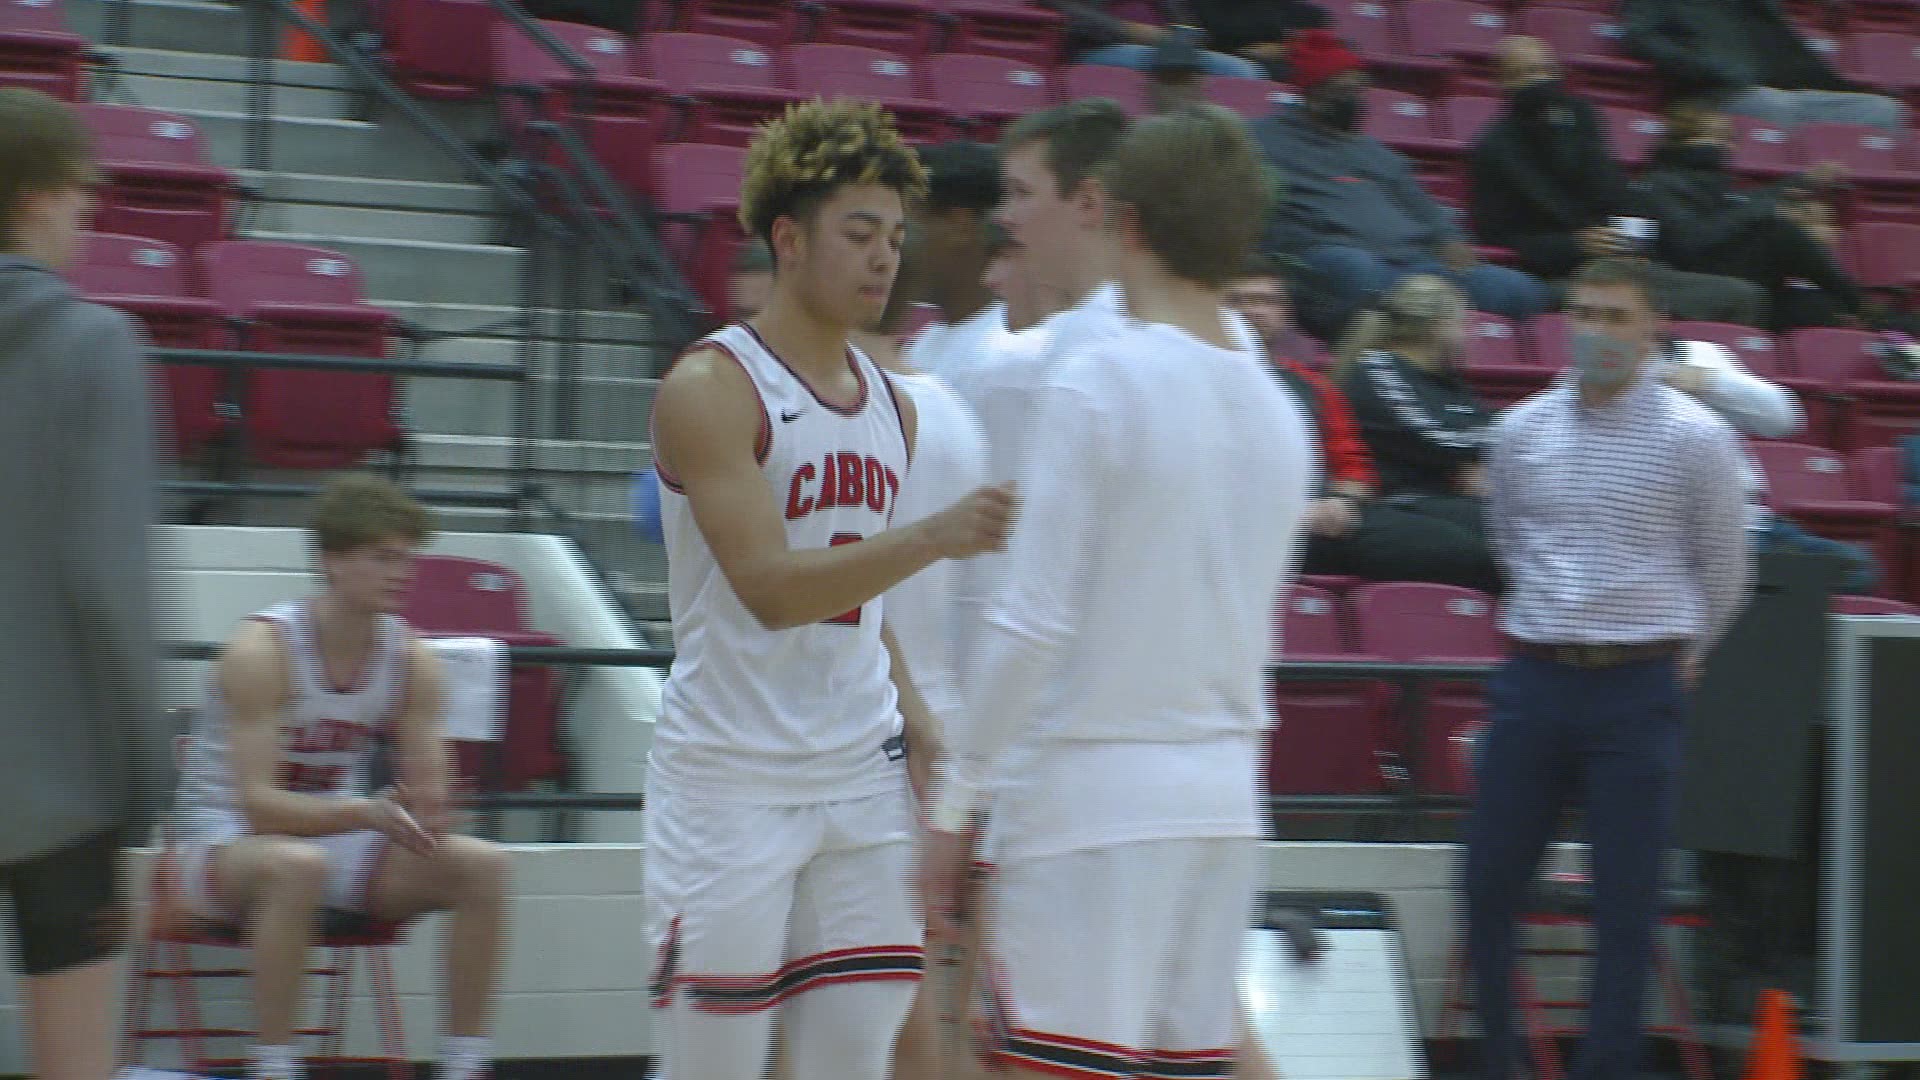 It took overtime for the Central girls to outlast Cabot, while the boys rolled in a 20-point victory